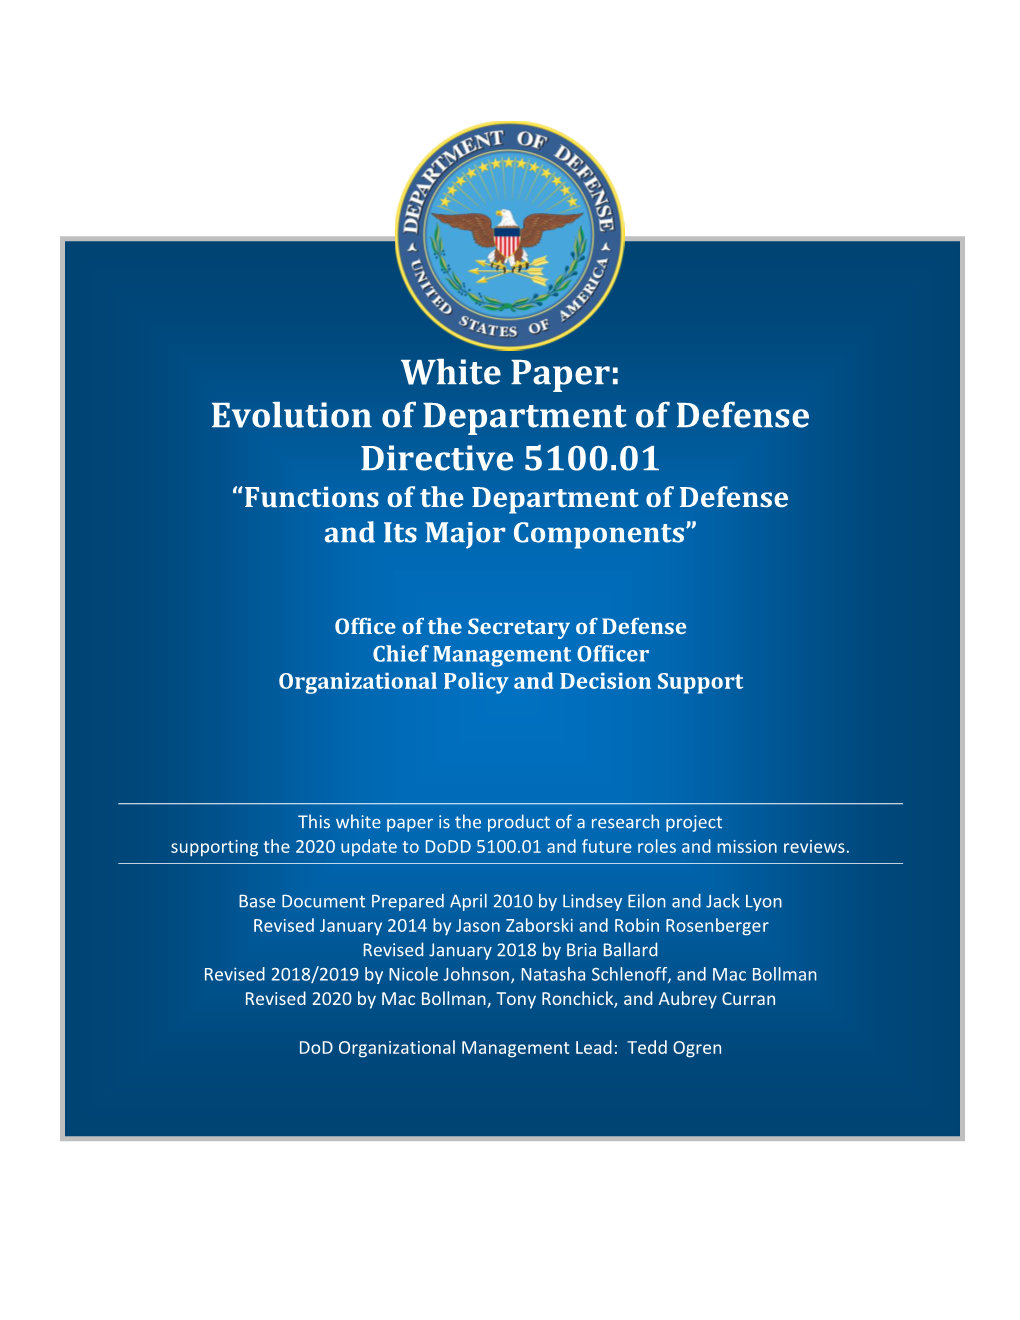 White Paper: Evolution of Department of Defense Directive 5100.01 “Functions of the Department of Defense and Its Major Components”